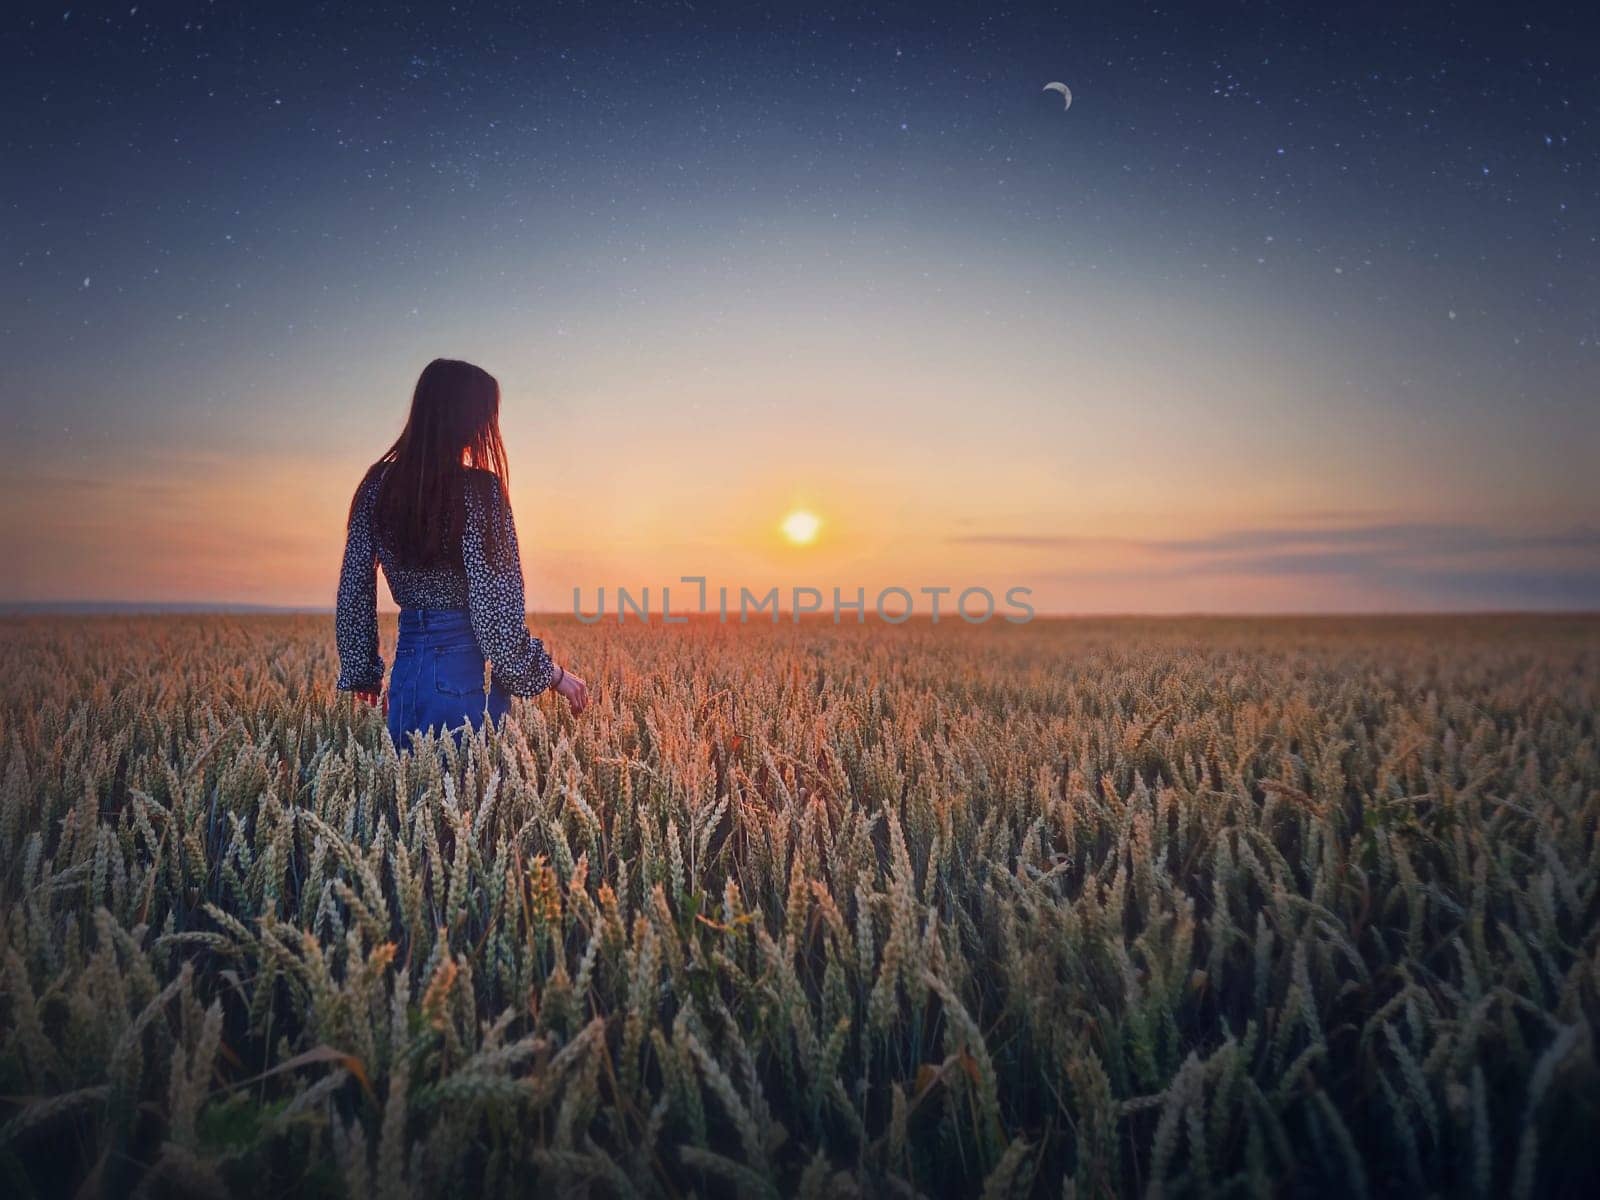 Young woman in the golden wheat field at sunset. Beautiful twilight scenery under the summer sun and crescent moon with starry sky by psychoshadow